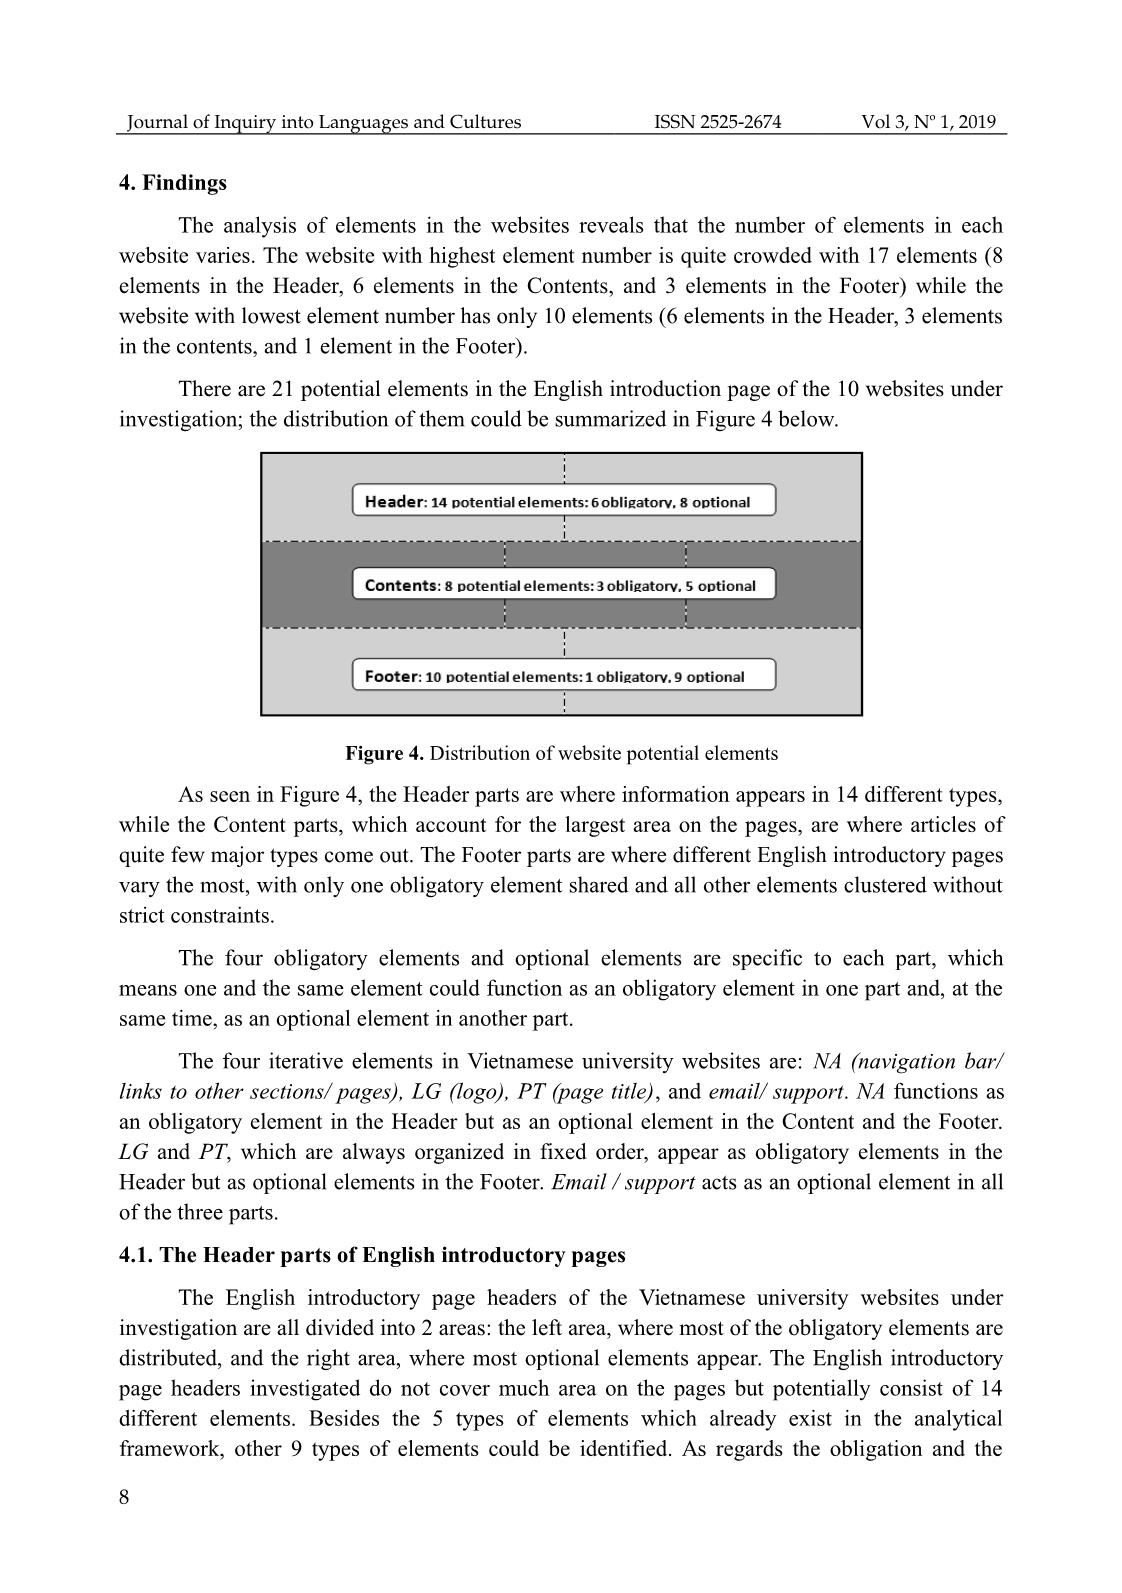 Generic structure potential of the english introductory information pages of university websites in Vietnam trang 8